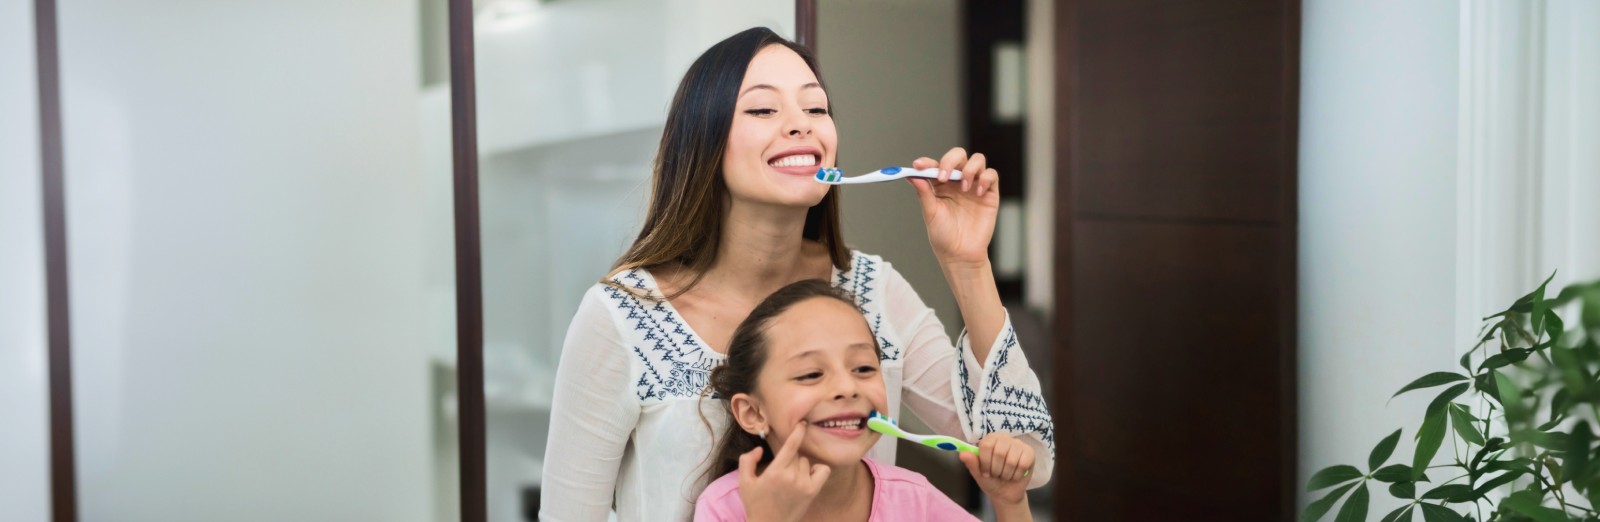 ESP-family-with-toothbrushes-1600x522.jpeg